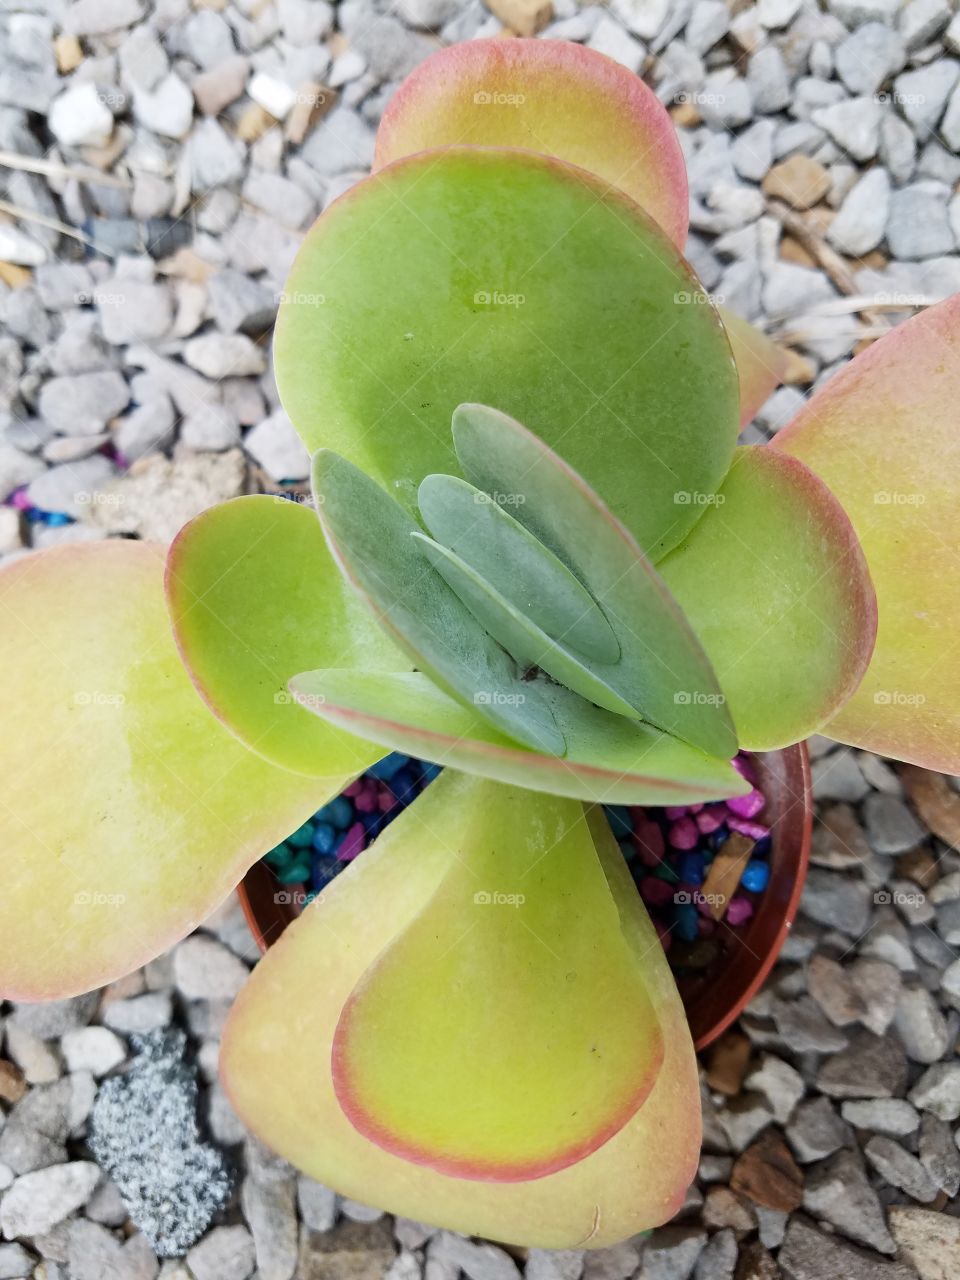 my kalanchoe flapjack showing off his colors!